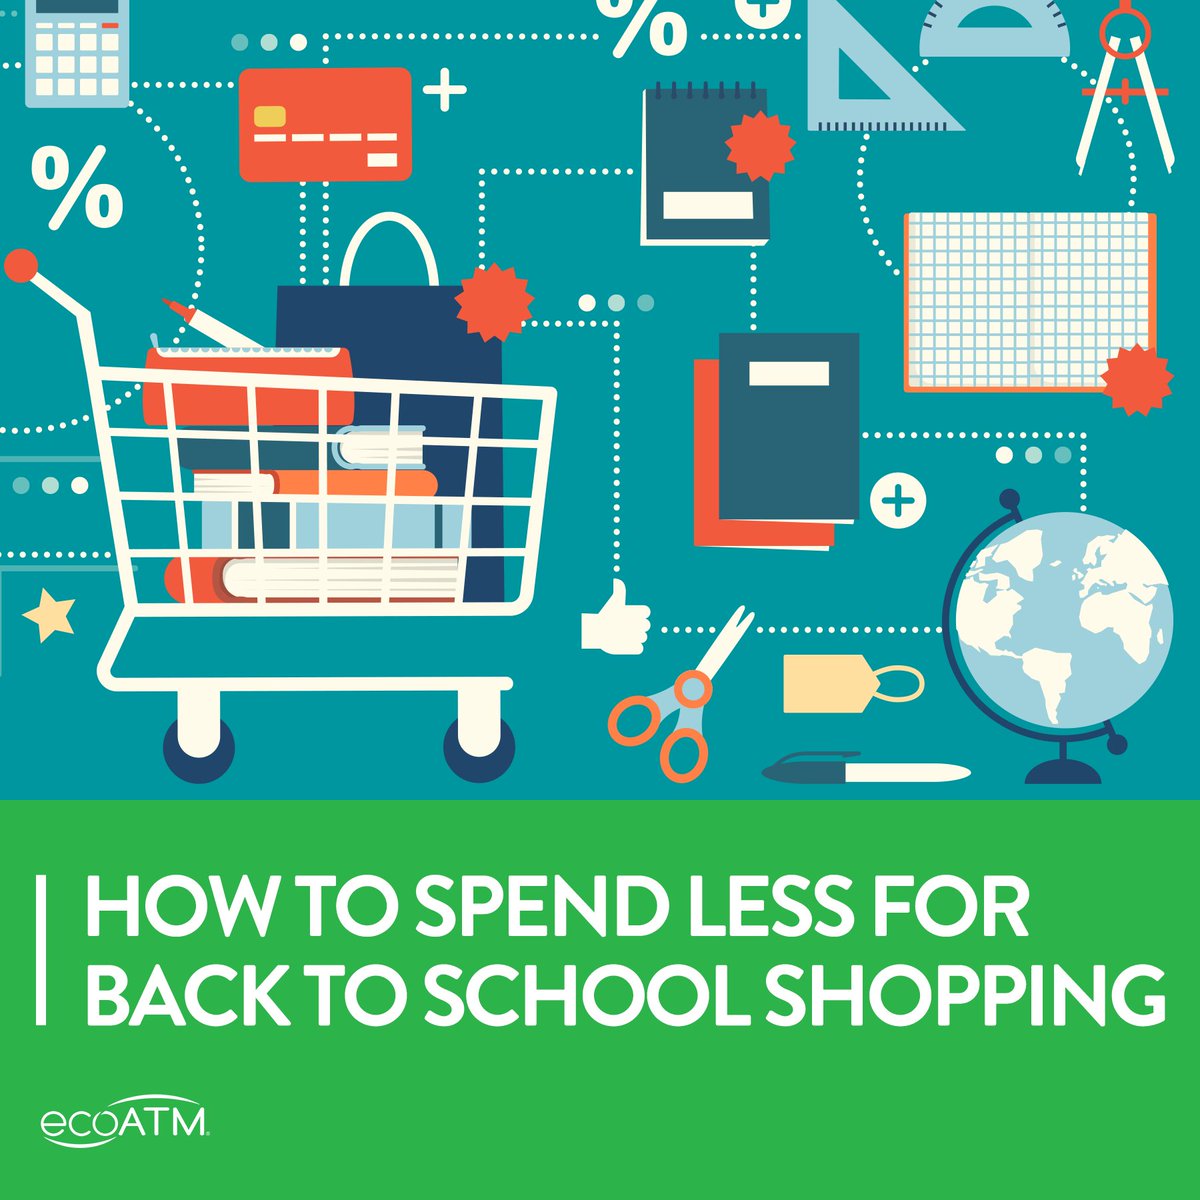 Is your wallet feeling the impact of #backtoschool? Check out our guide on how to save this September! ecoatm.com/blogs/news/sma…